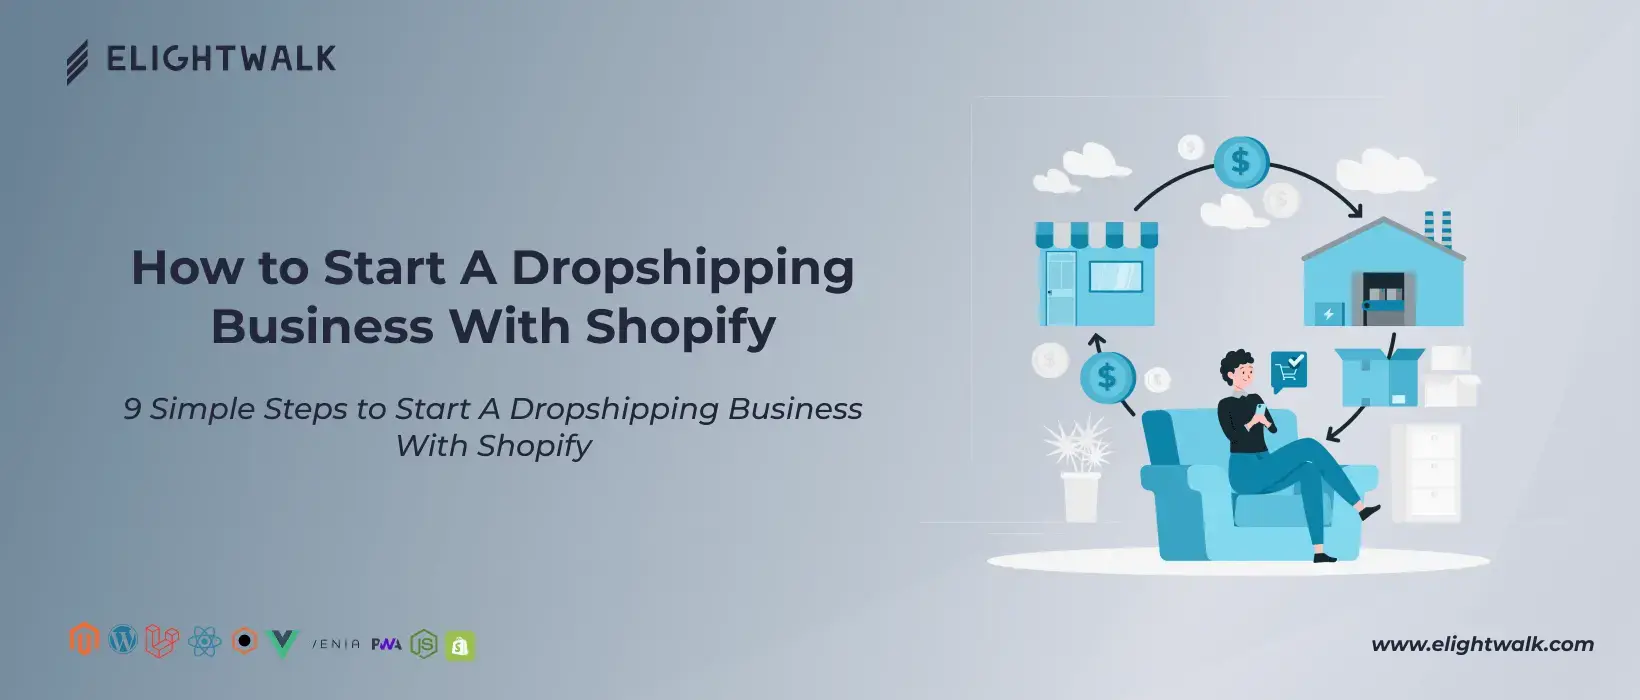 Start dropshipping business with shopify